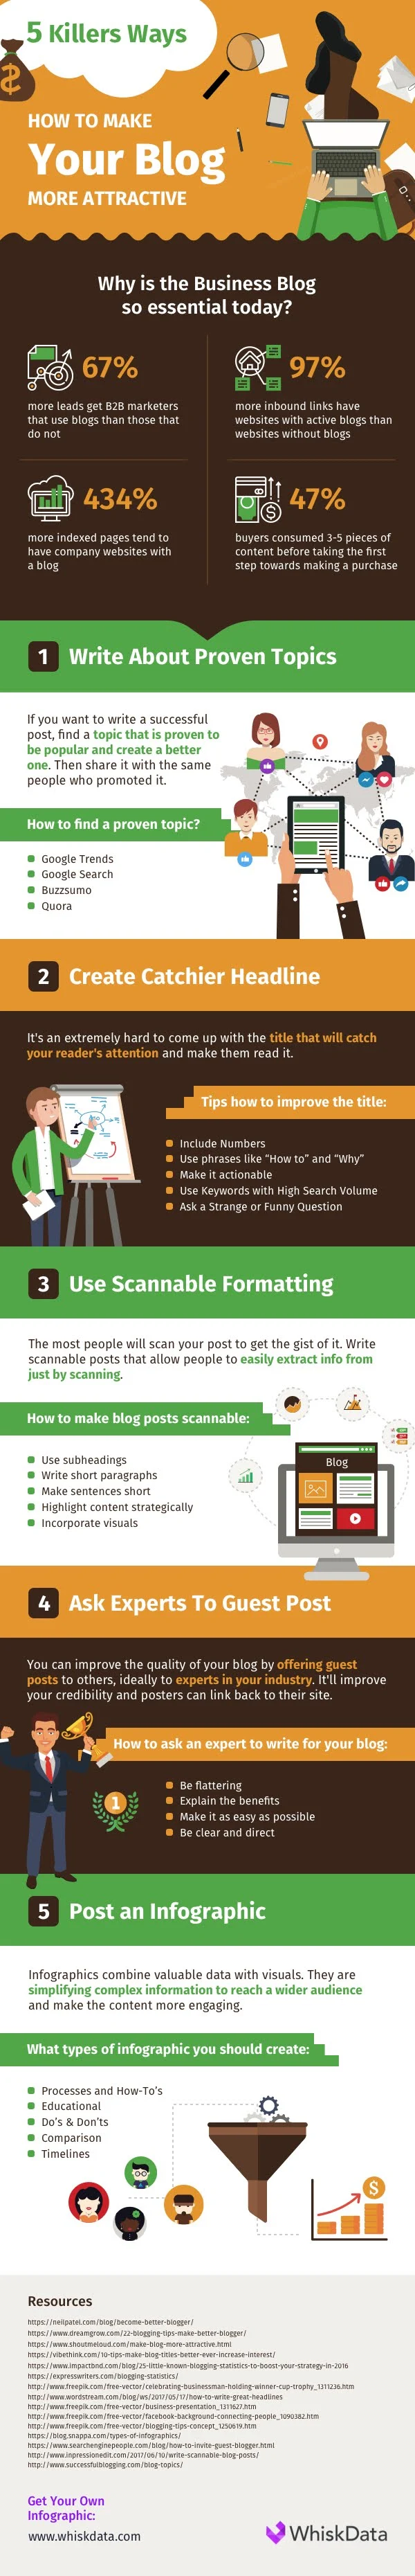 5 Killers Way How to Make Your Blog More Attractive - #Infographic